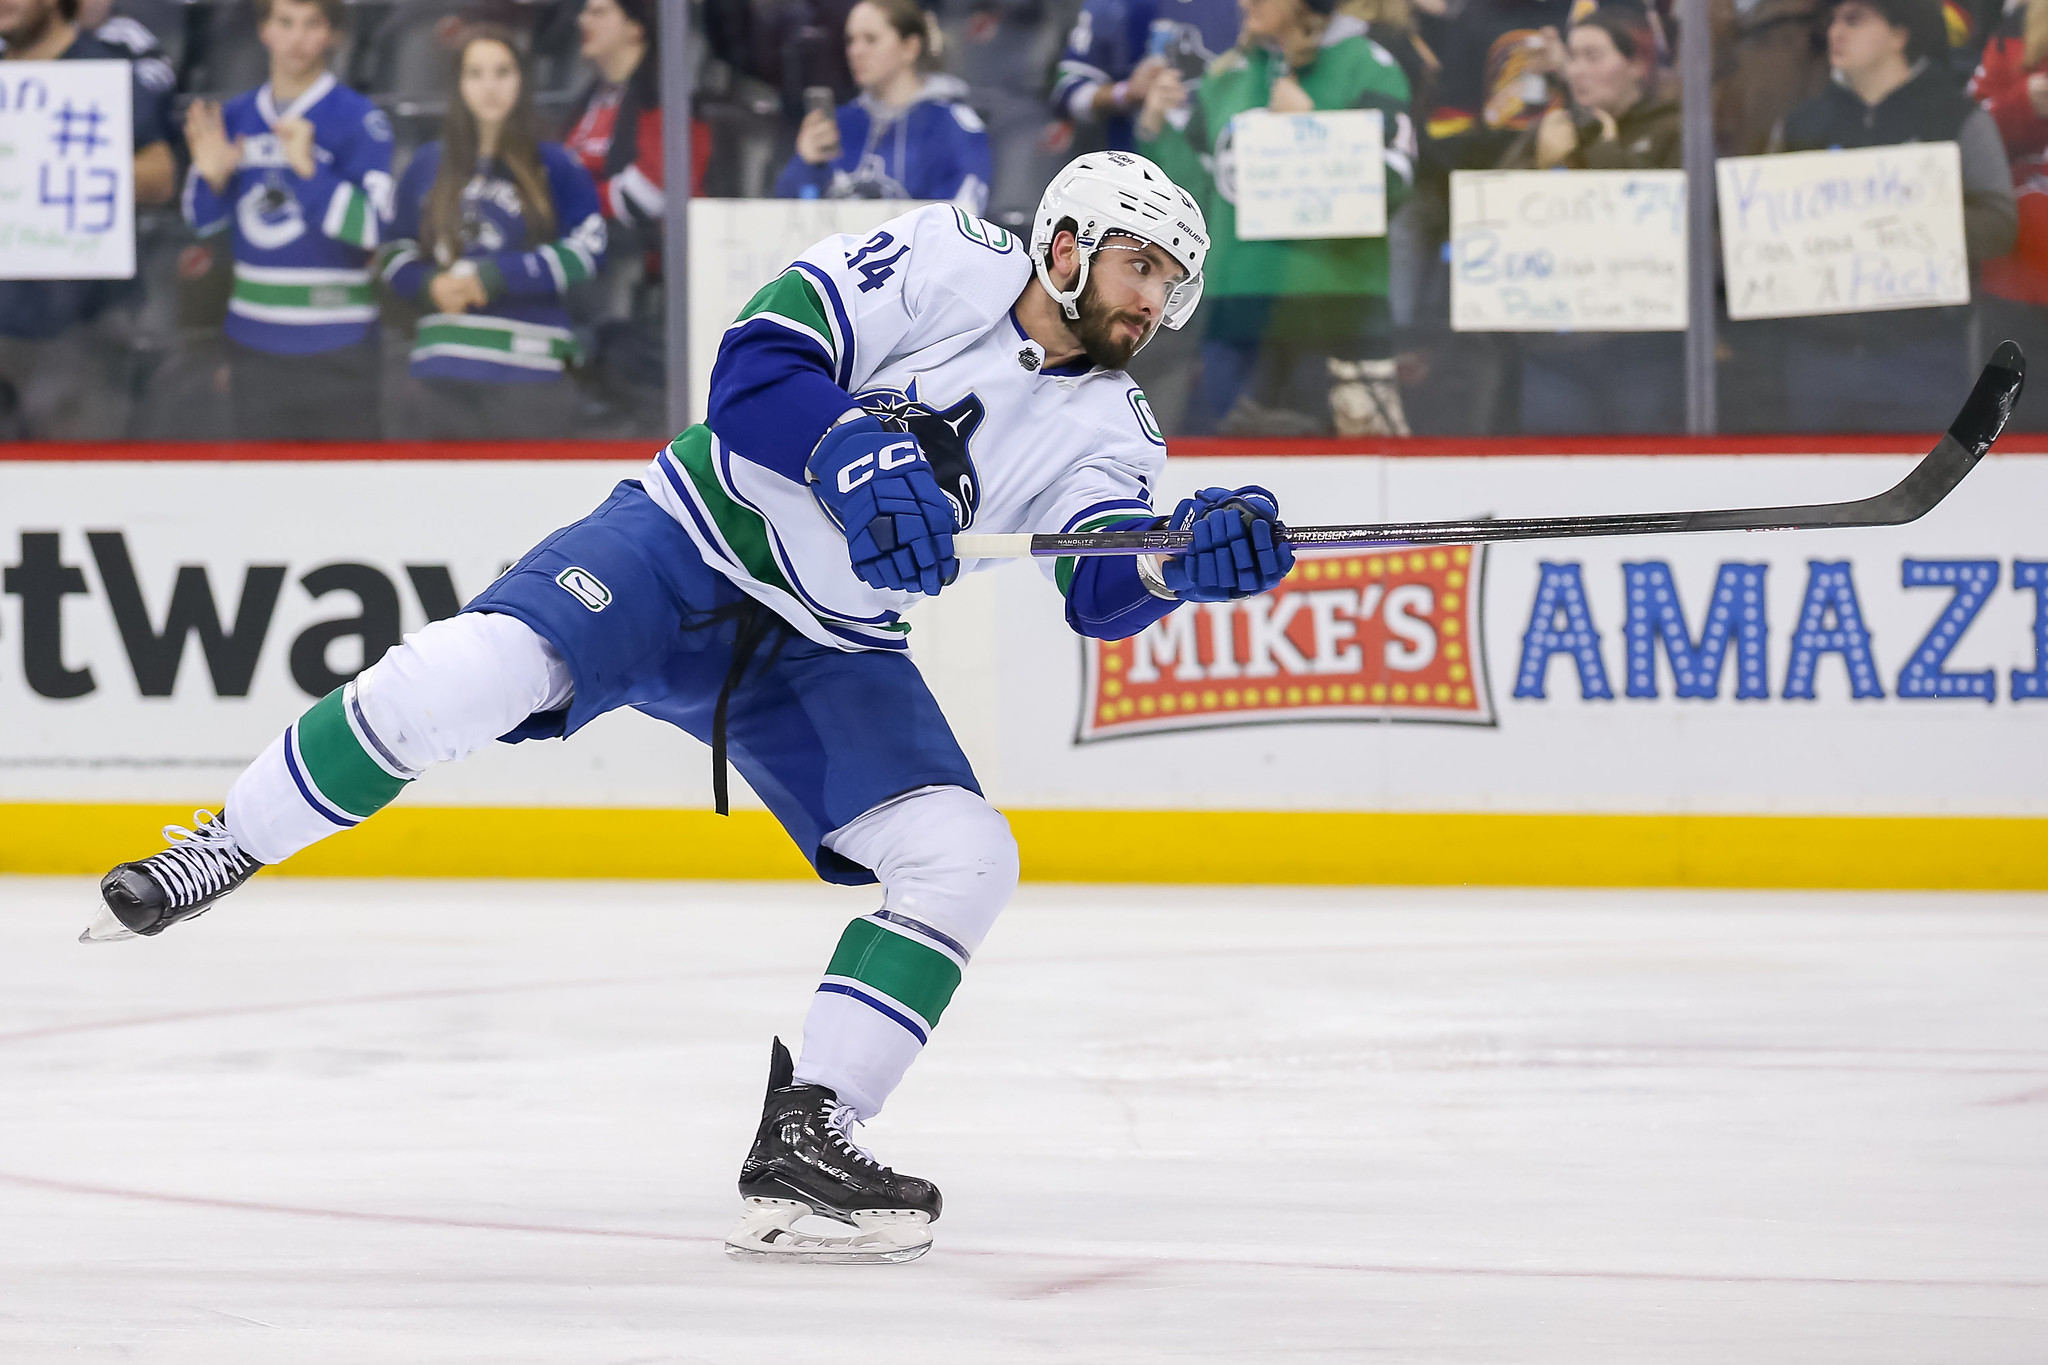 Canucks' Di Giuseppe Has Earned His Spot On Next Year's Team The